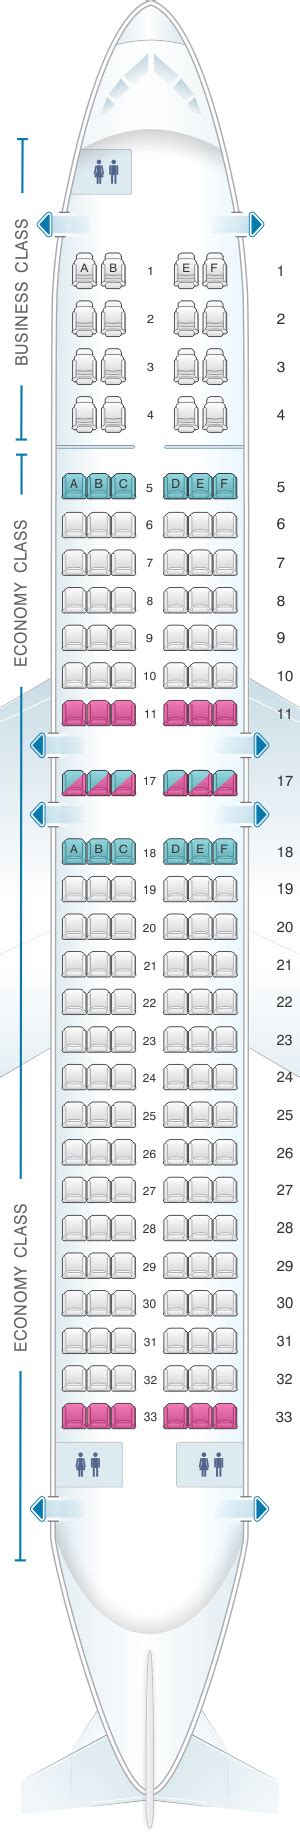 copa boeing 737-800 seating chart